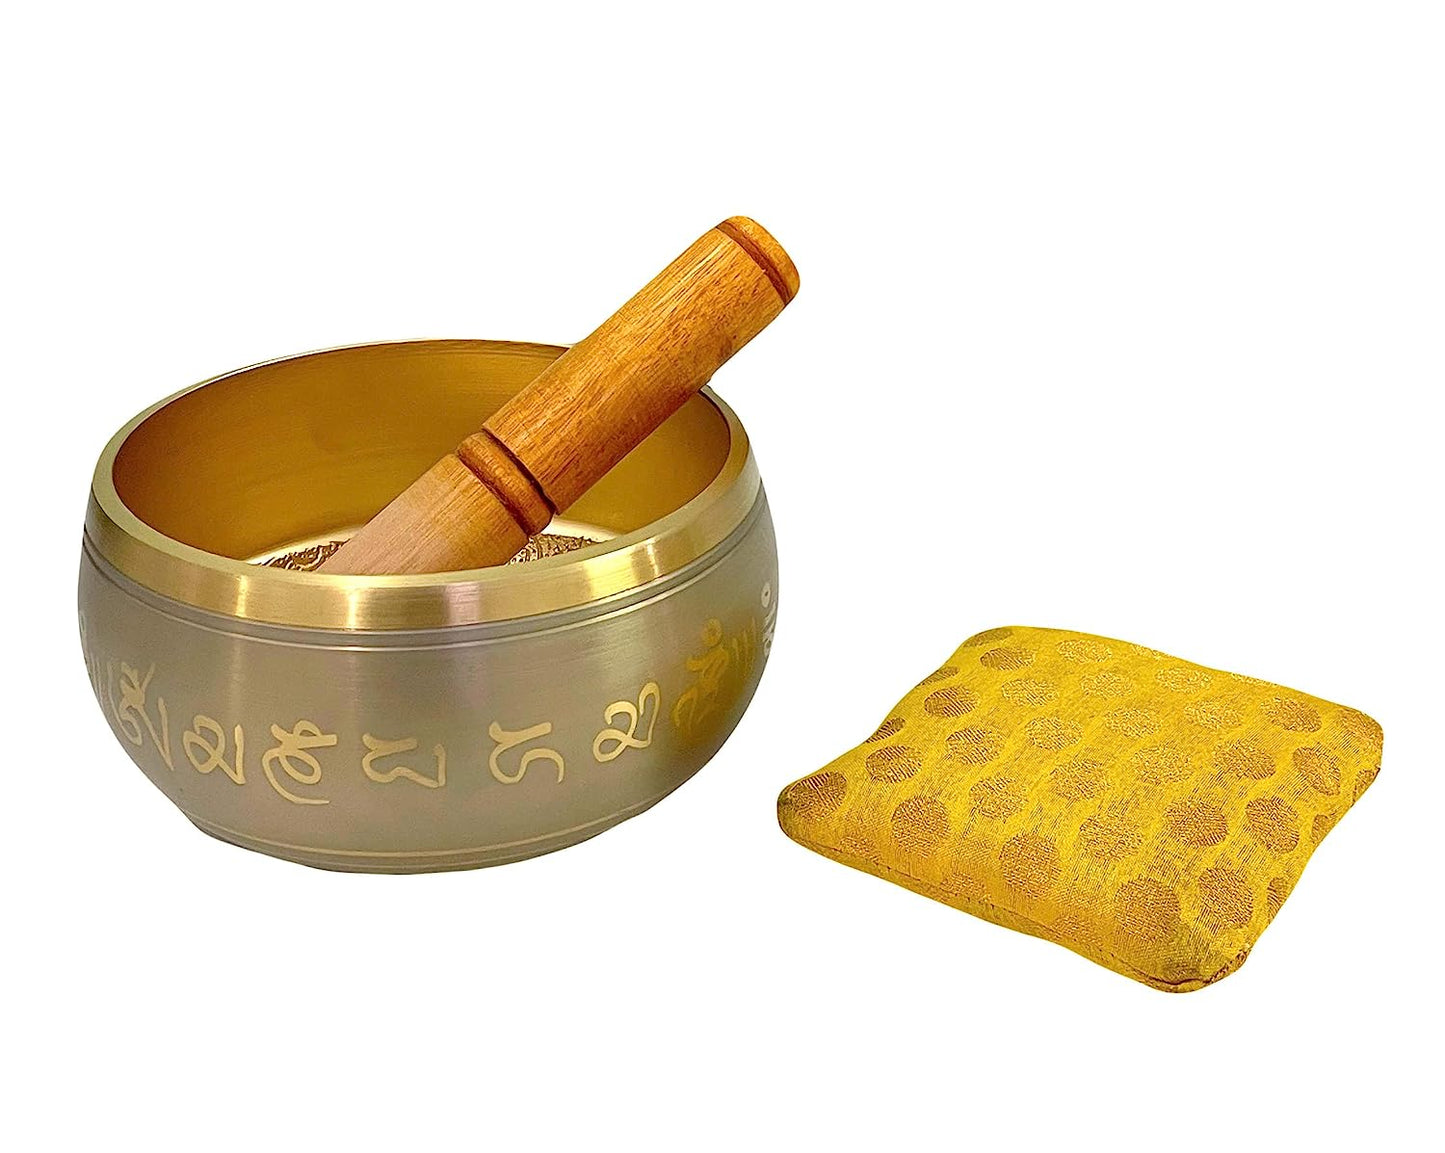 Rudra Exports Brass Sound Singing Bowl for stress relief Meditation with striker stick Bell Sound (4 inch Grey)